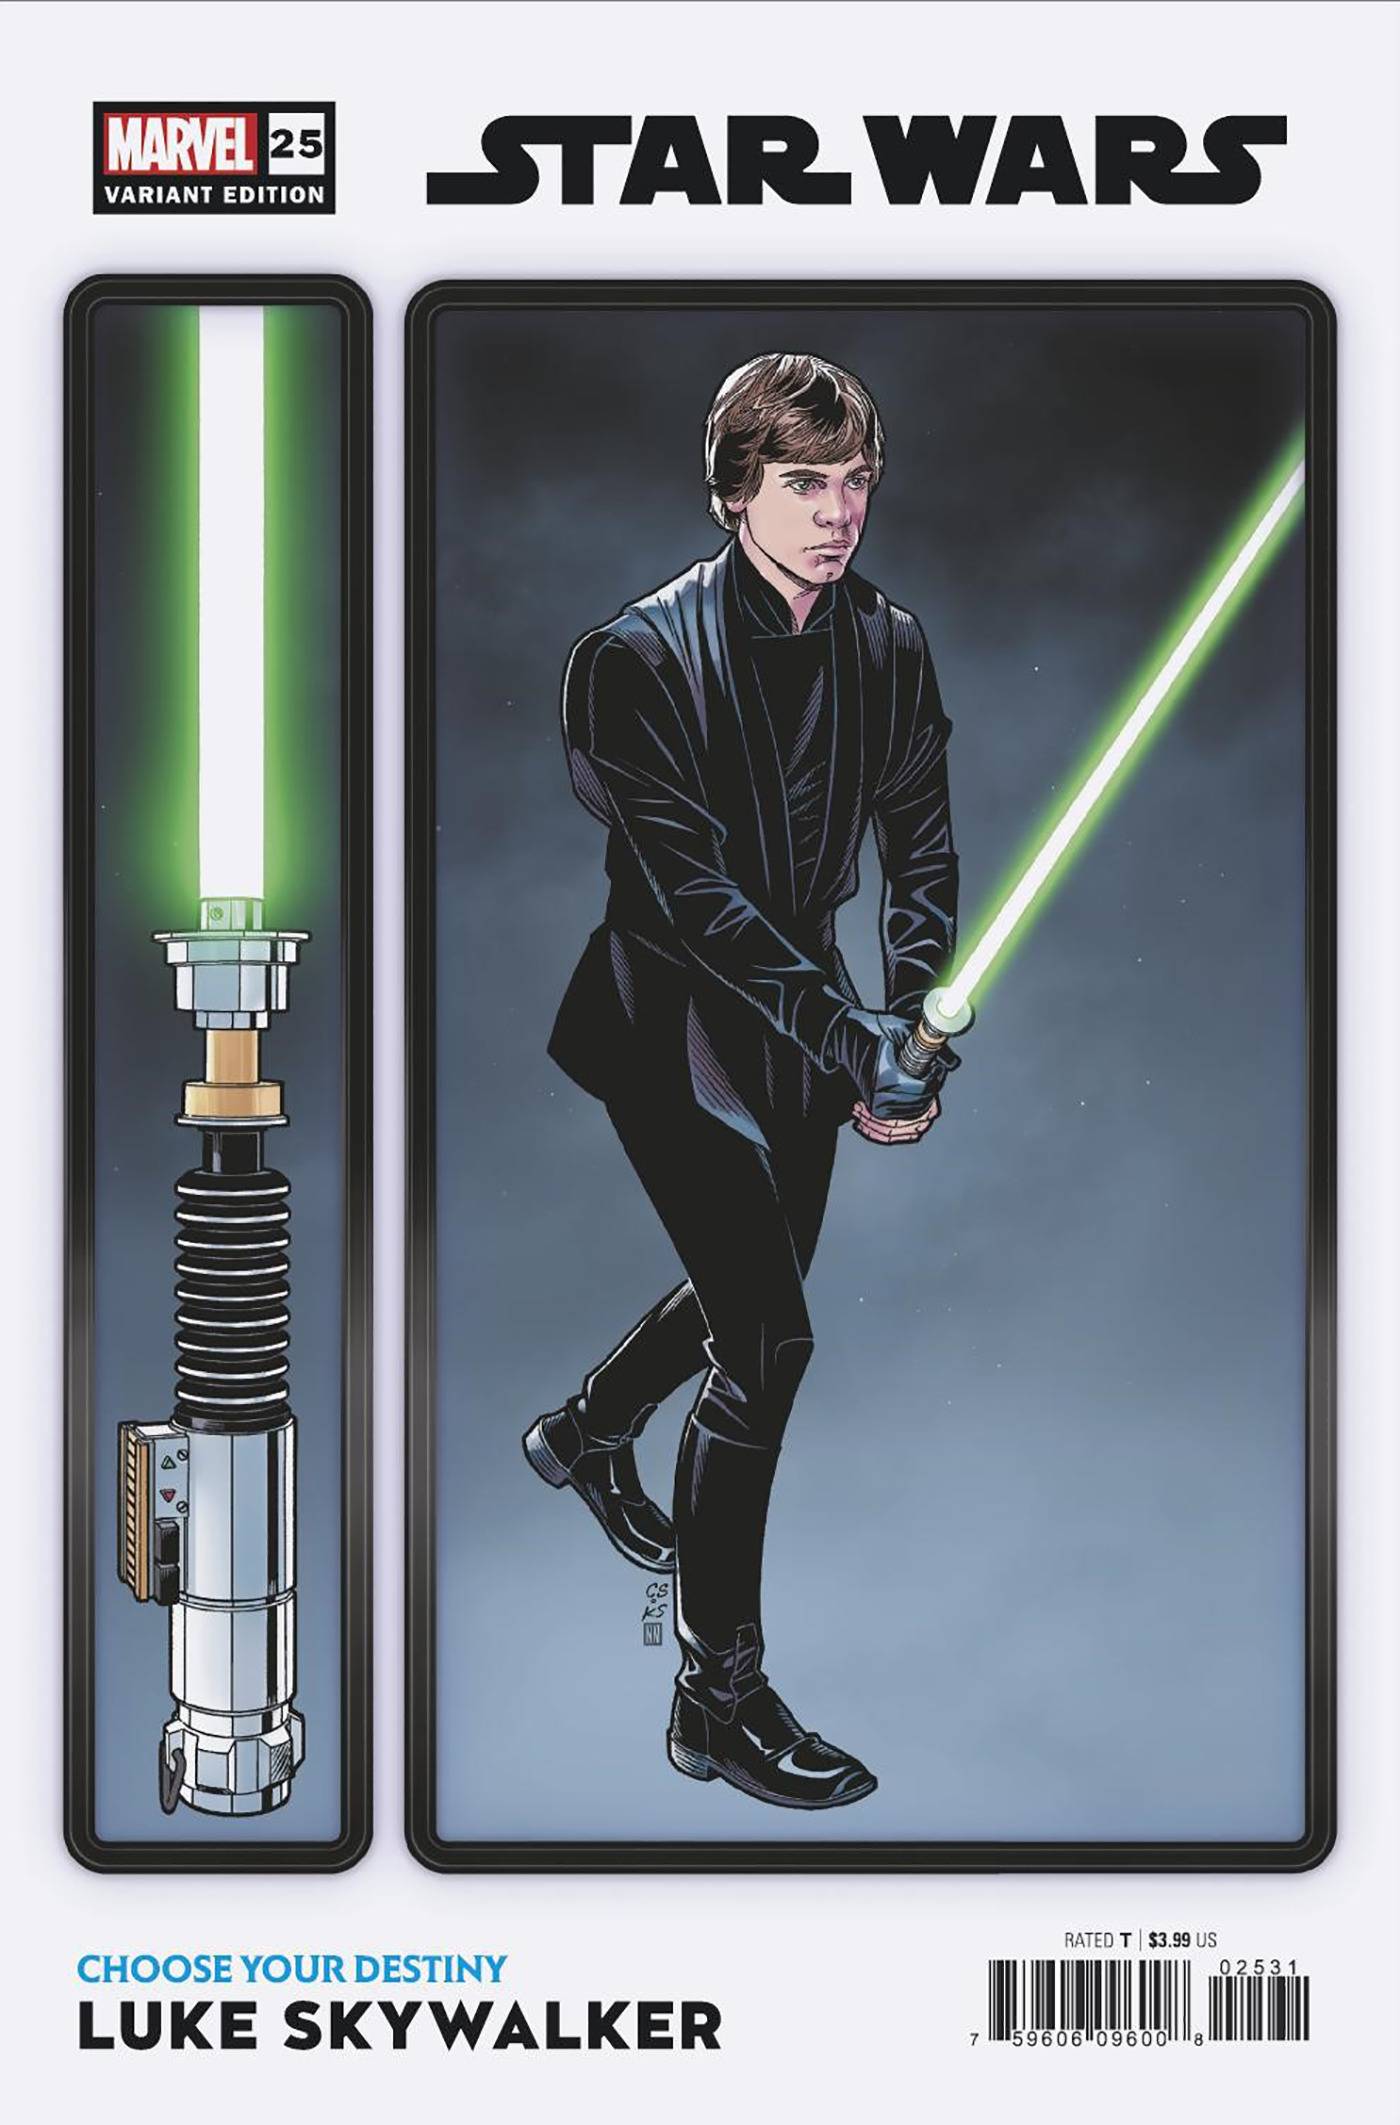 07/20/2022 STAR WARS 25 SPROUSE CHOOSE YOUR DESTINY VARIANT